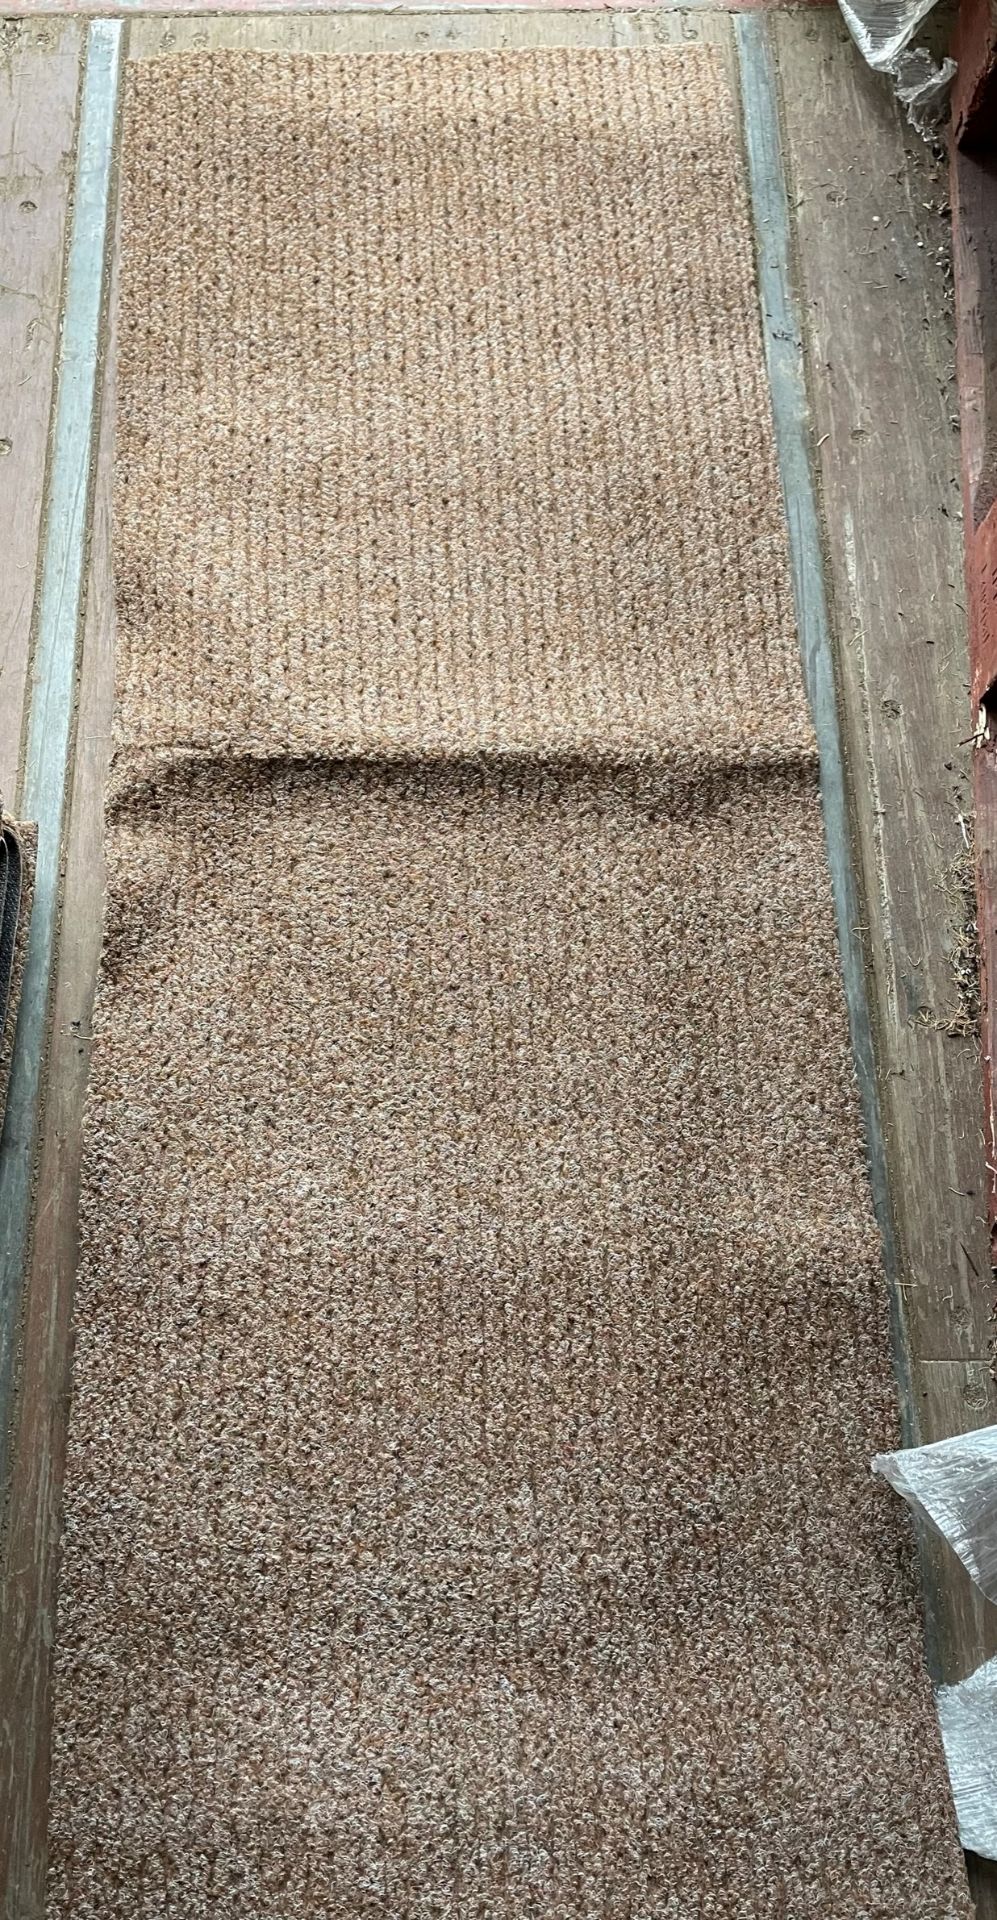 84 x ribbed brown fabric rubber backed runners 150 x 54cm (saleroom location: container A)